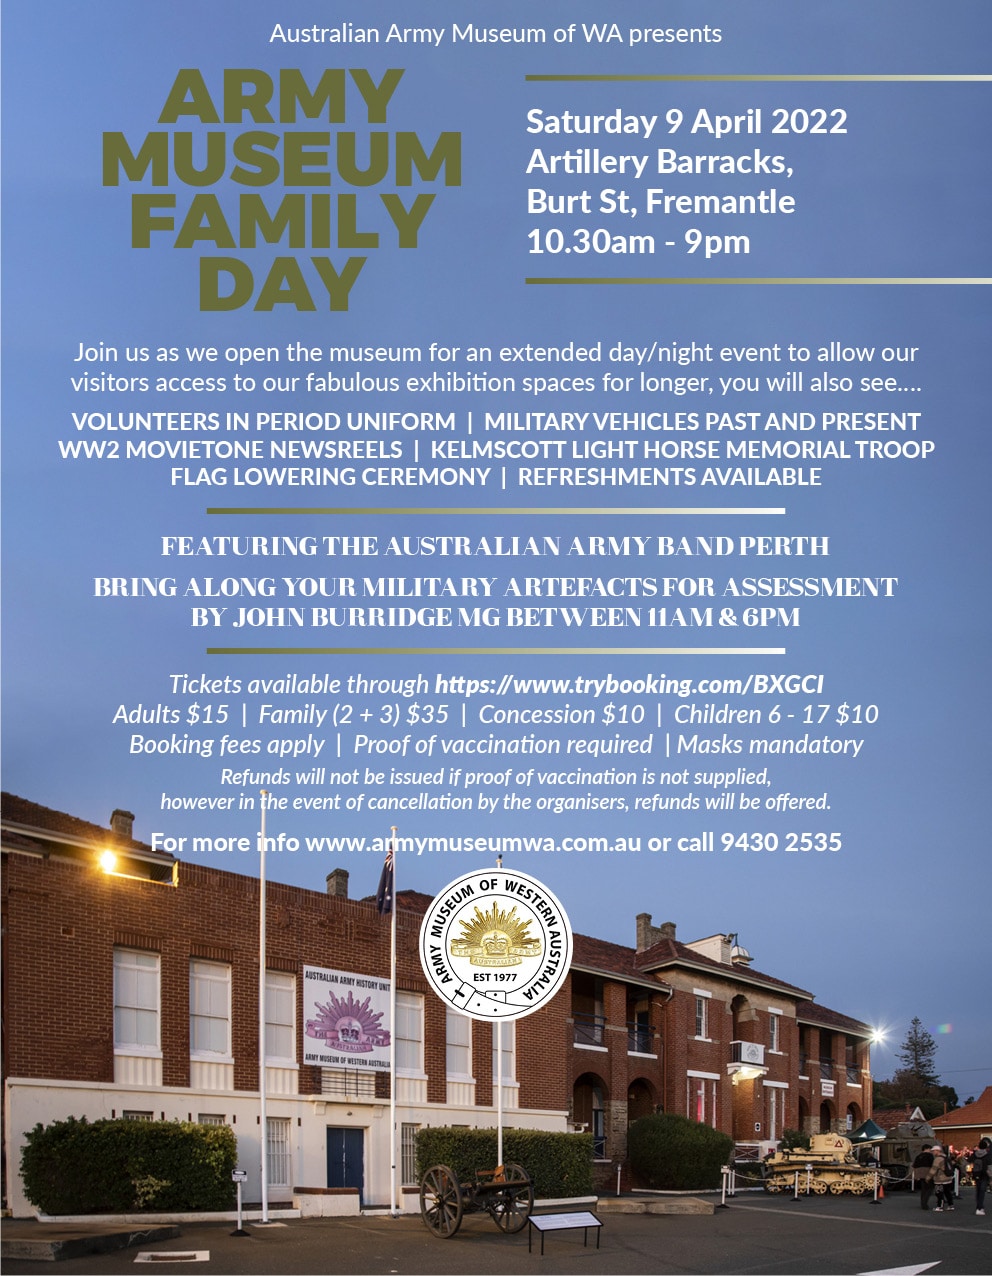 Army Museum of WA - Family Day Flyer - April 2022